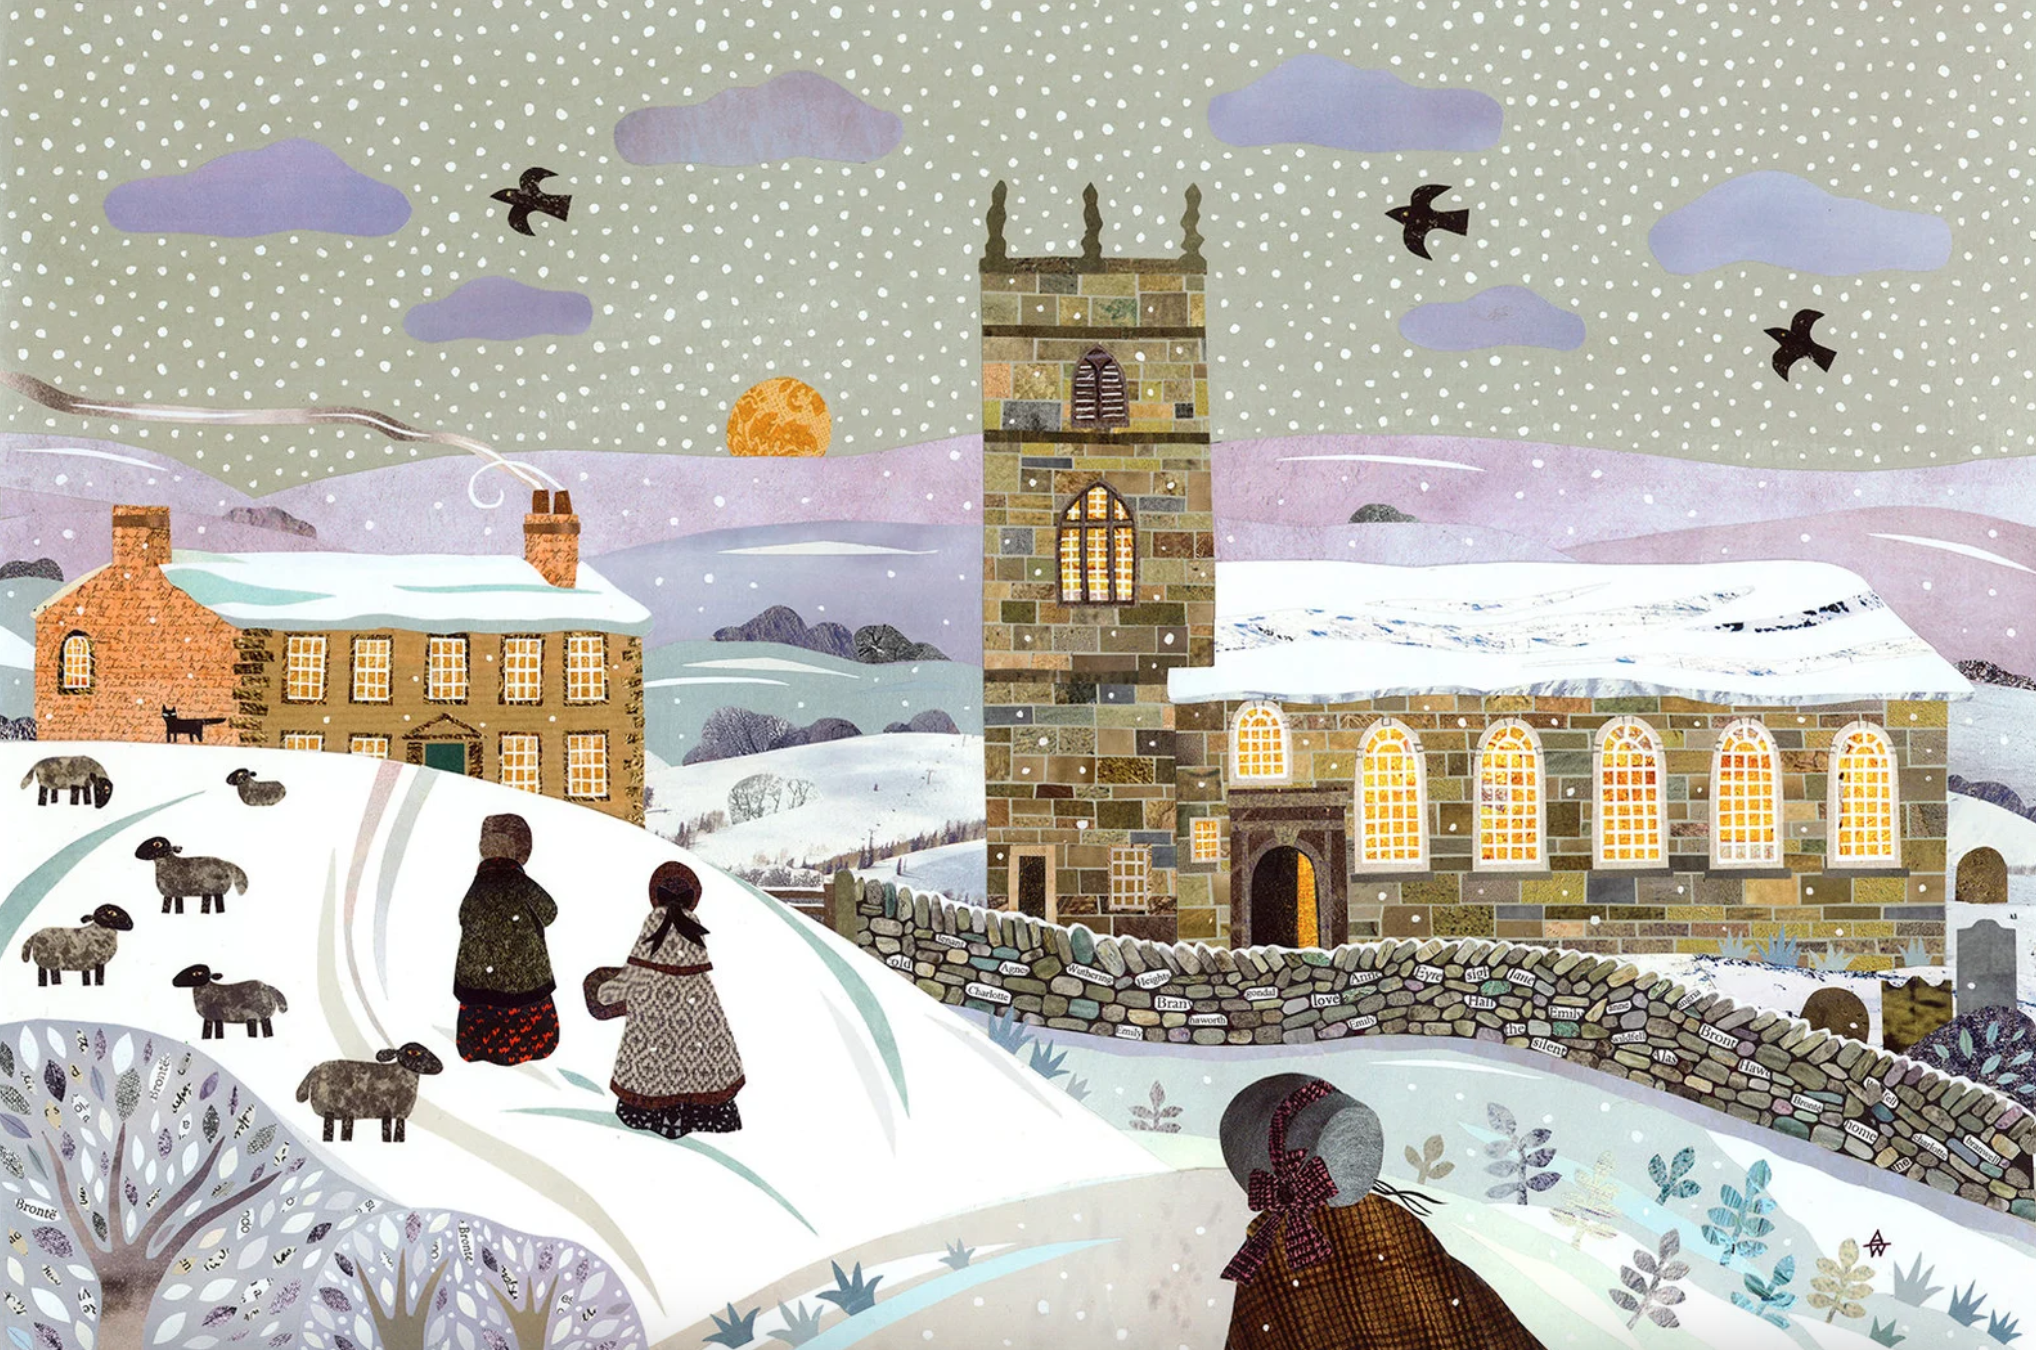 A card featuring The Brontë Sisters walking home from a winter's walk. A traditional seasonal scene with snow and the church where their father was the vicar.